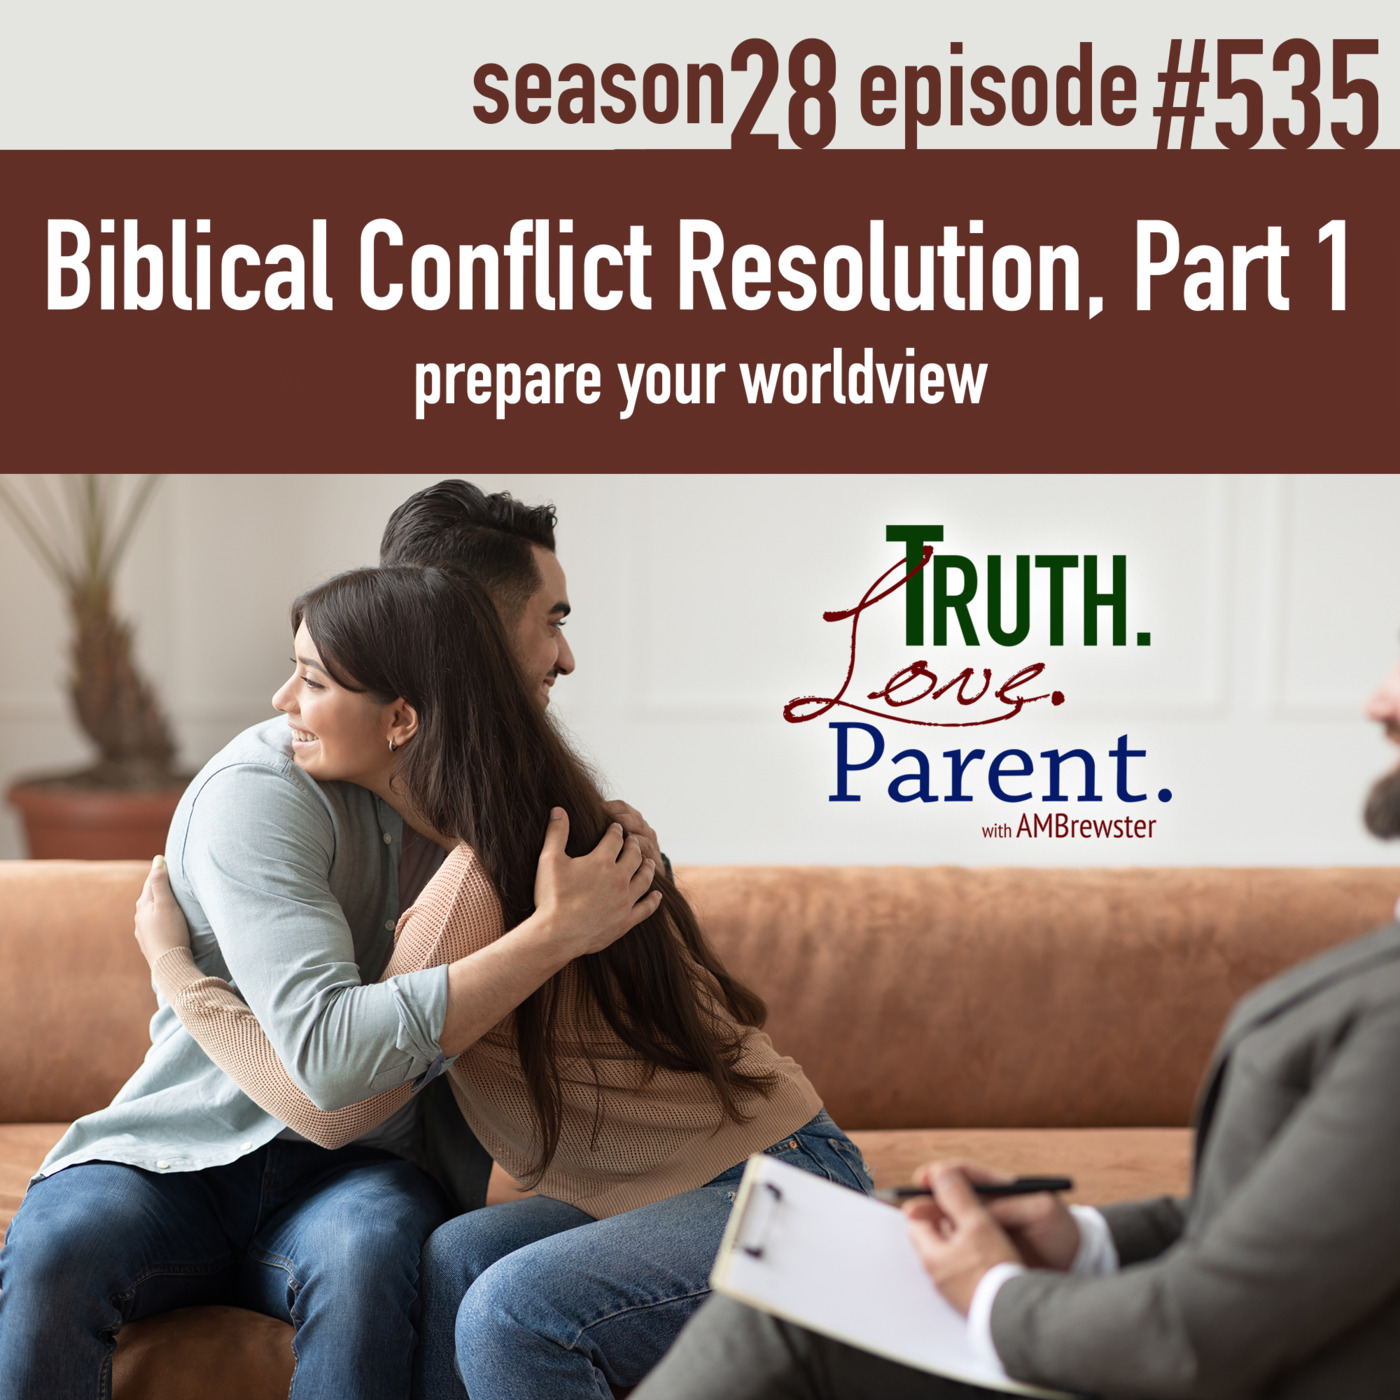 Episode 535: TLP 535: Biblical Conflict Resolution, Part 1 | prepare your worldview